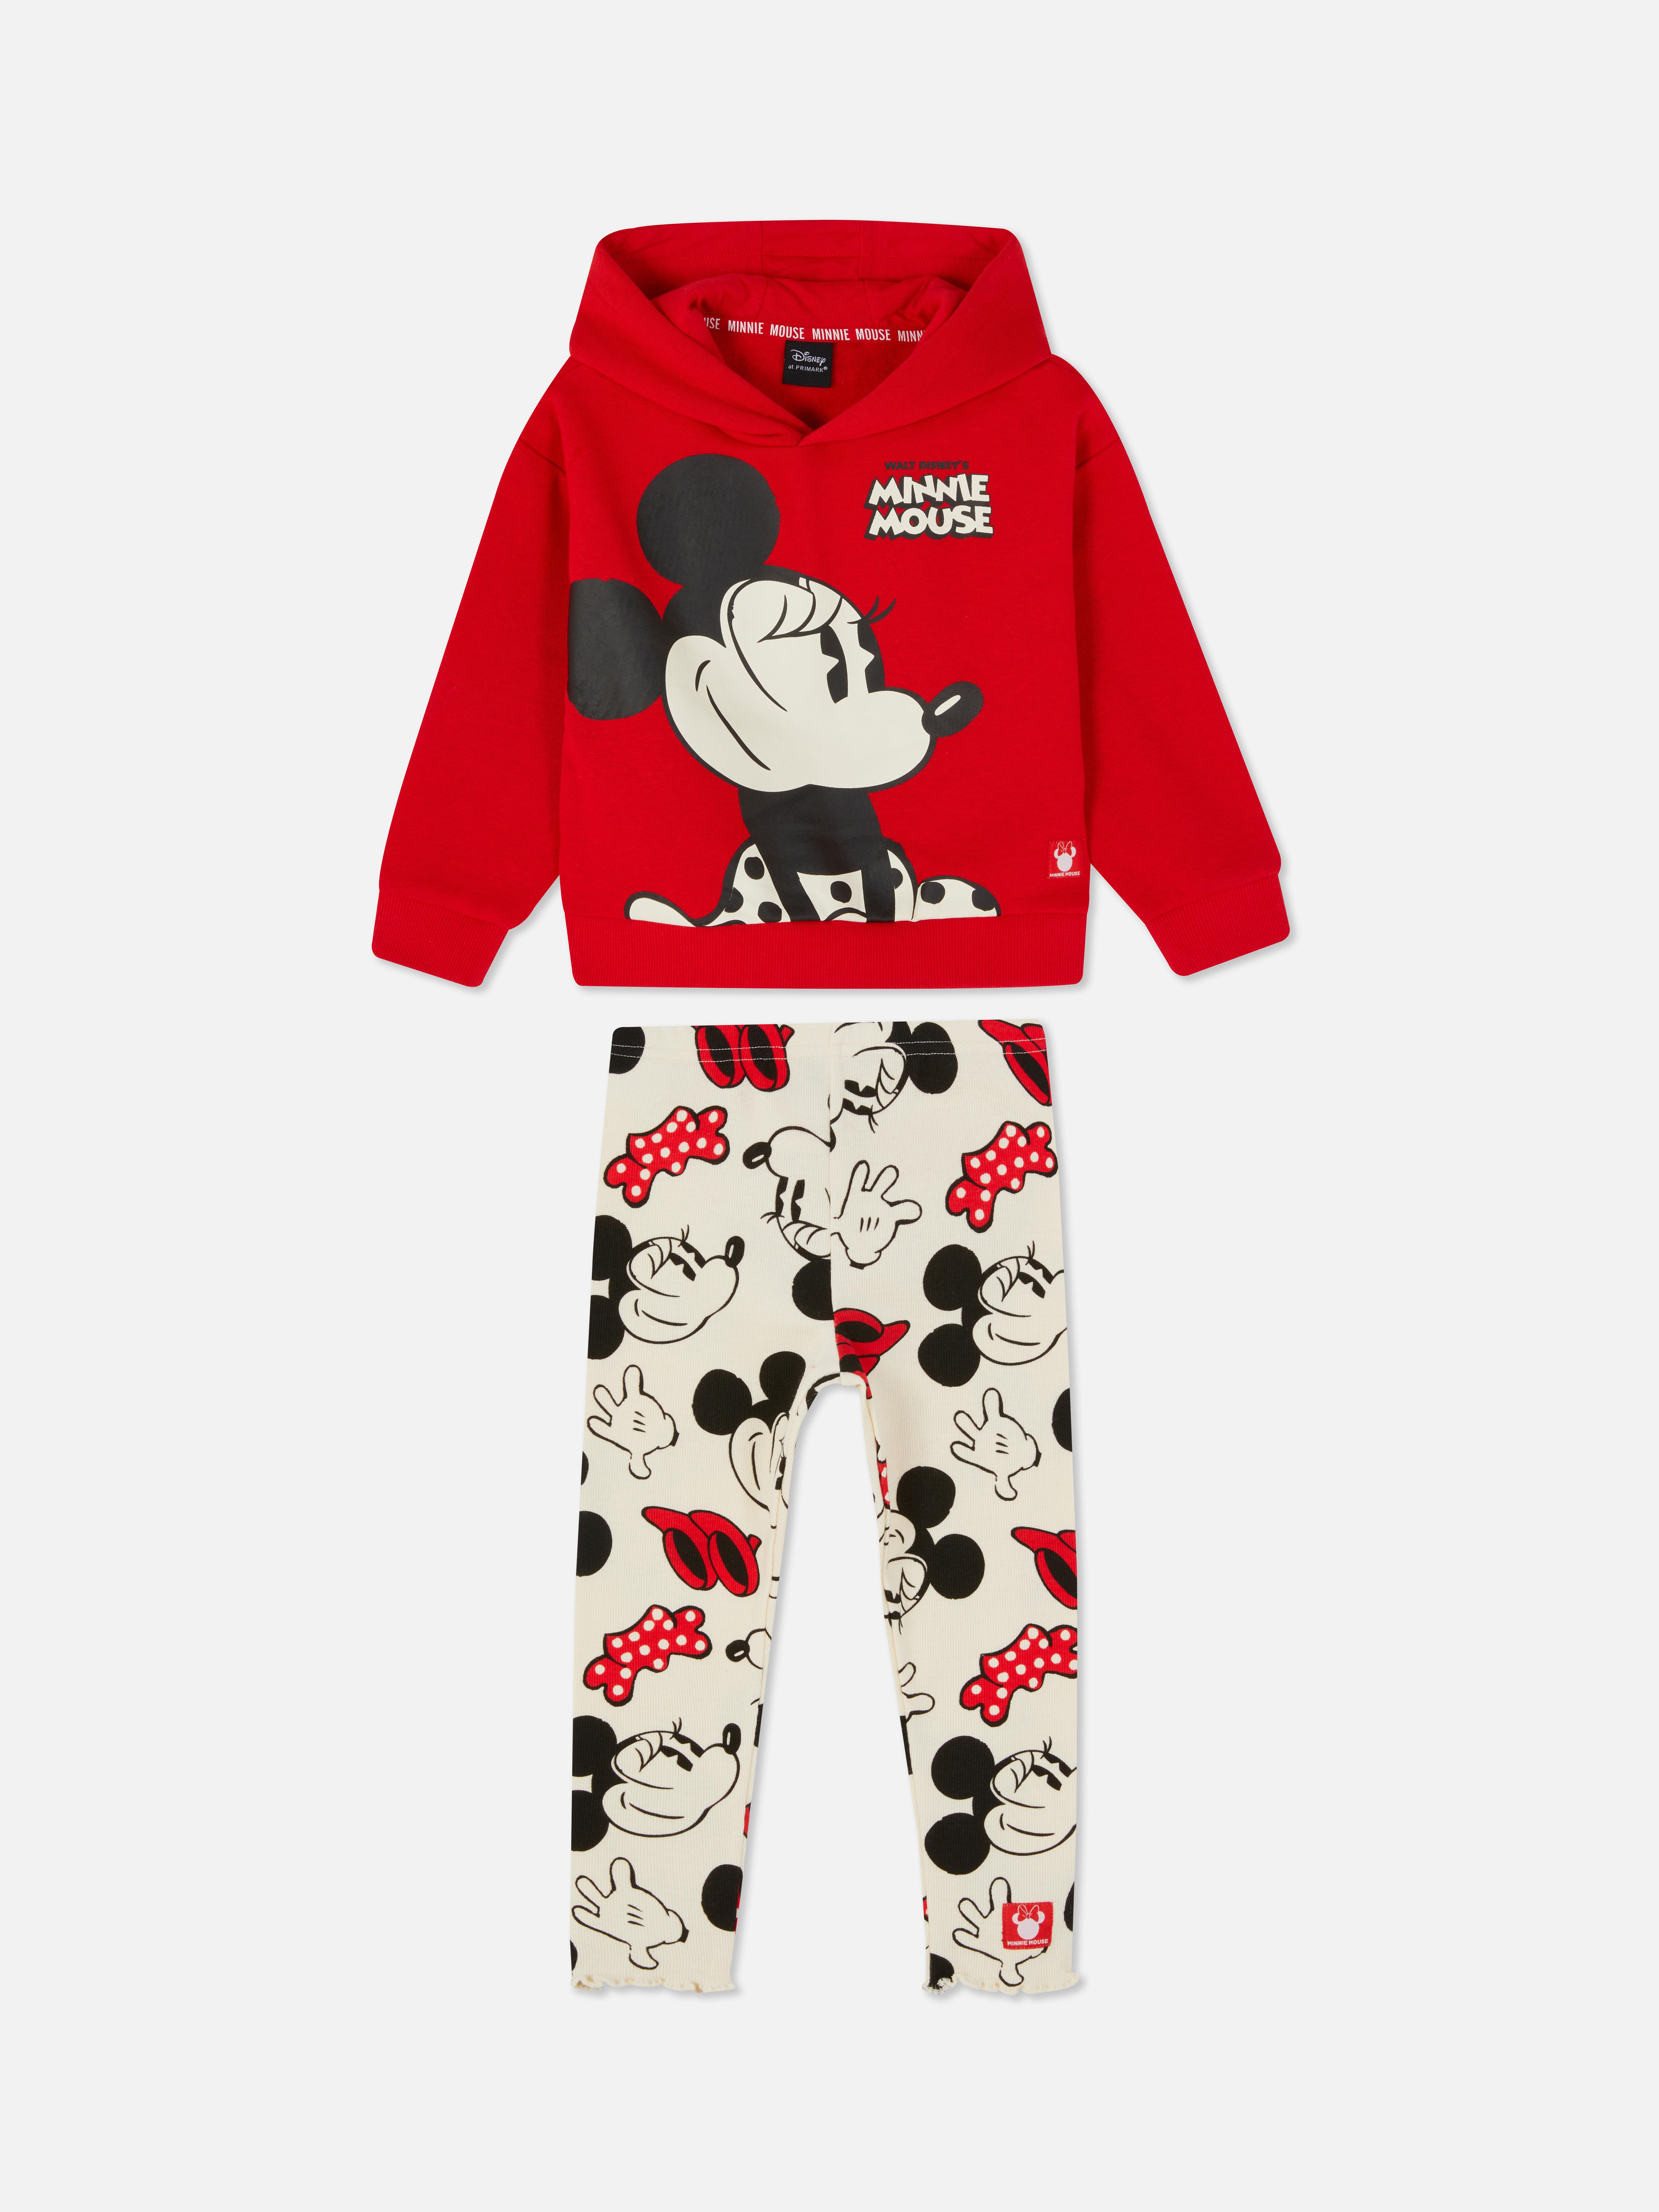 Disney's Minnie Mouse Hoody and Leggings Set